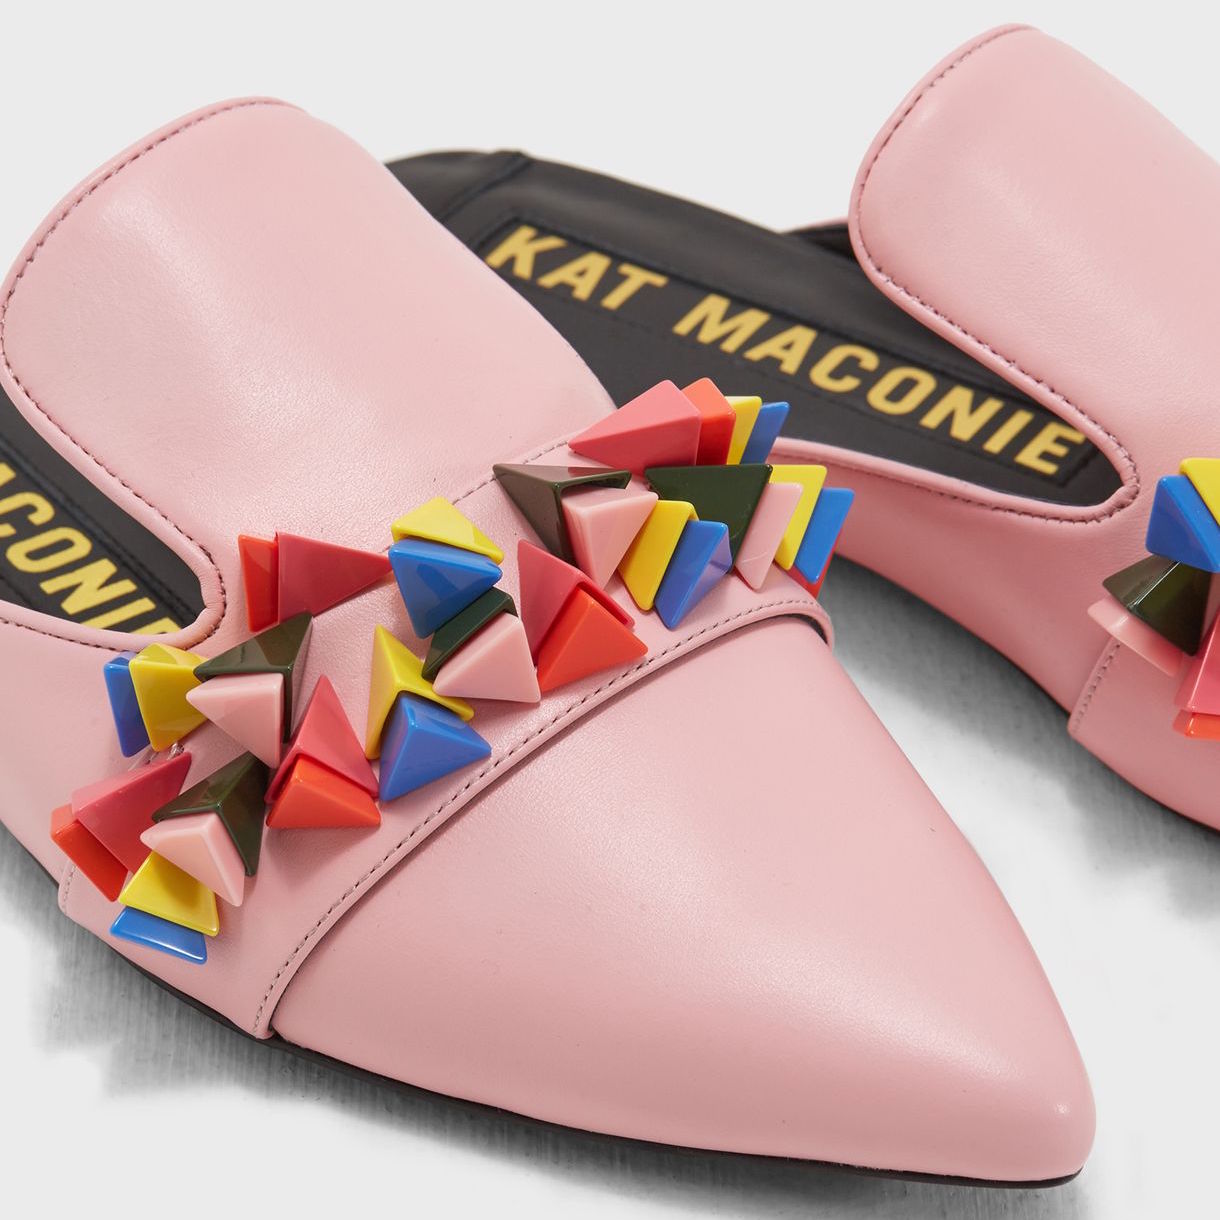 Close up view of a pair of the kat maconie issa mule. This slip on mule is pink with multicolored tiny pyramid shaped decorations on the upper. The shoe has a pointed toe.